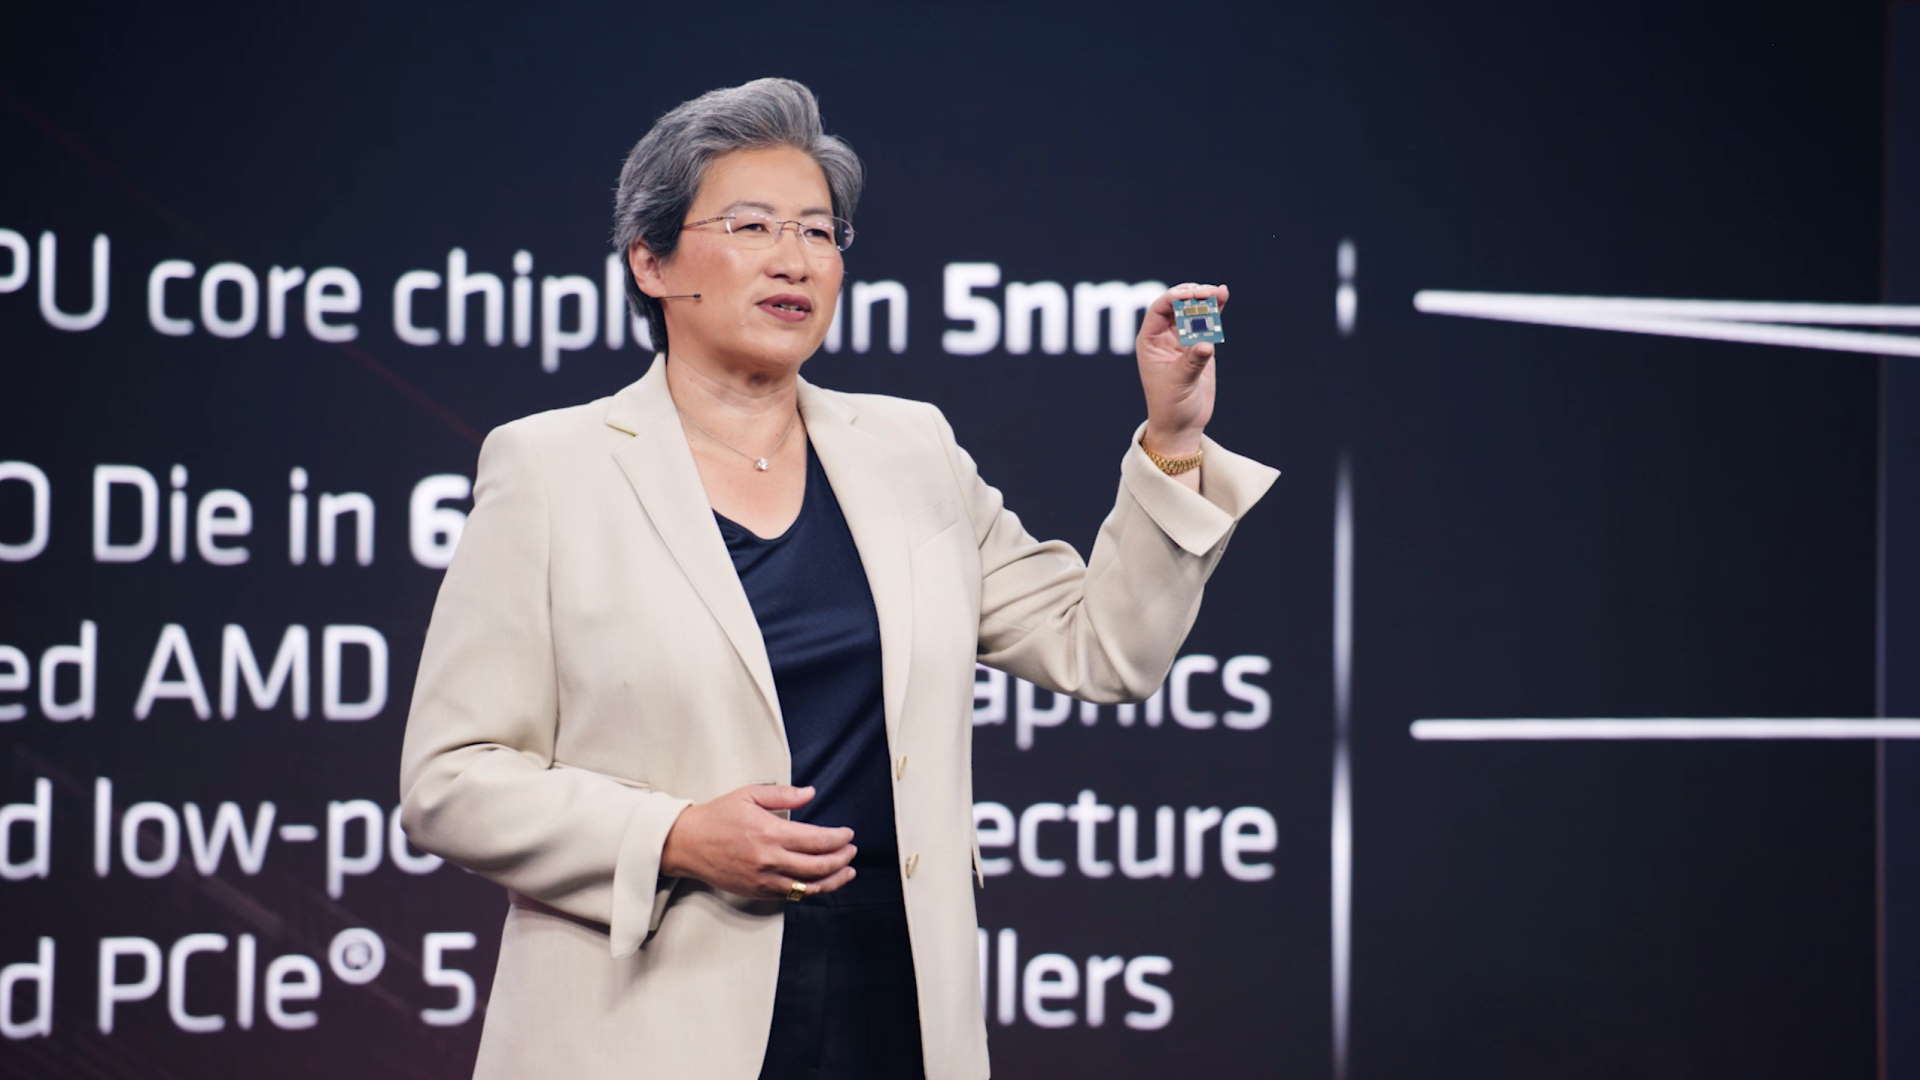 AMD CEO Dr.Lisa Su showing off the new Ryzen 7000 series CPUs